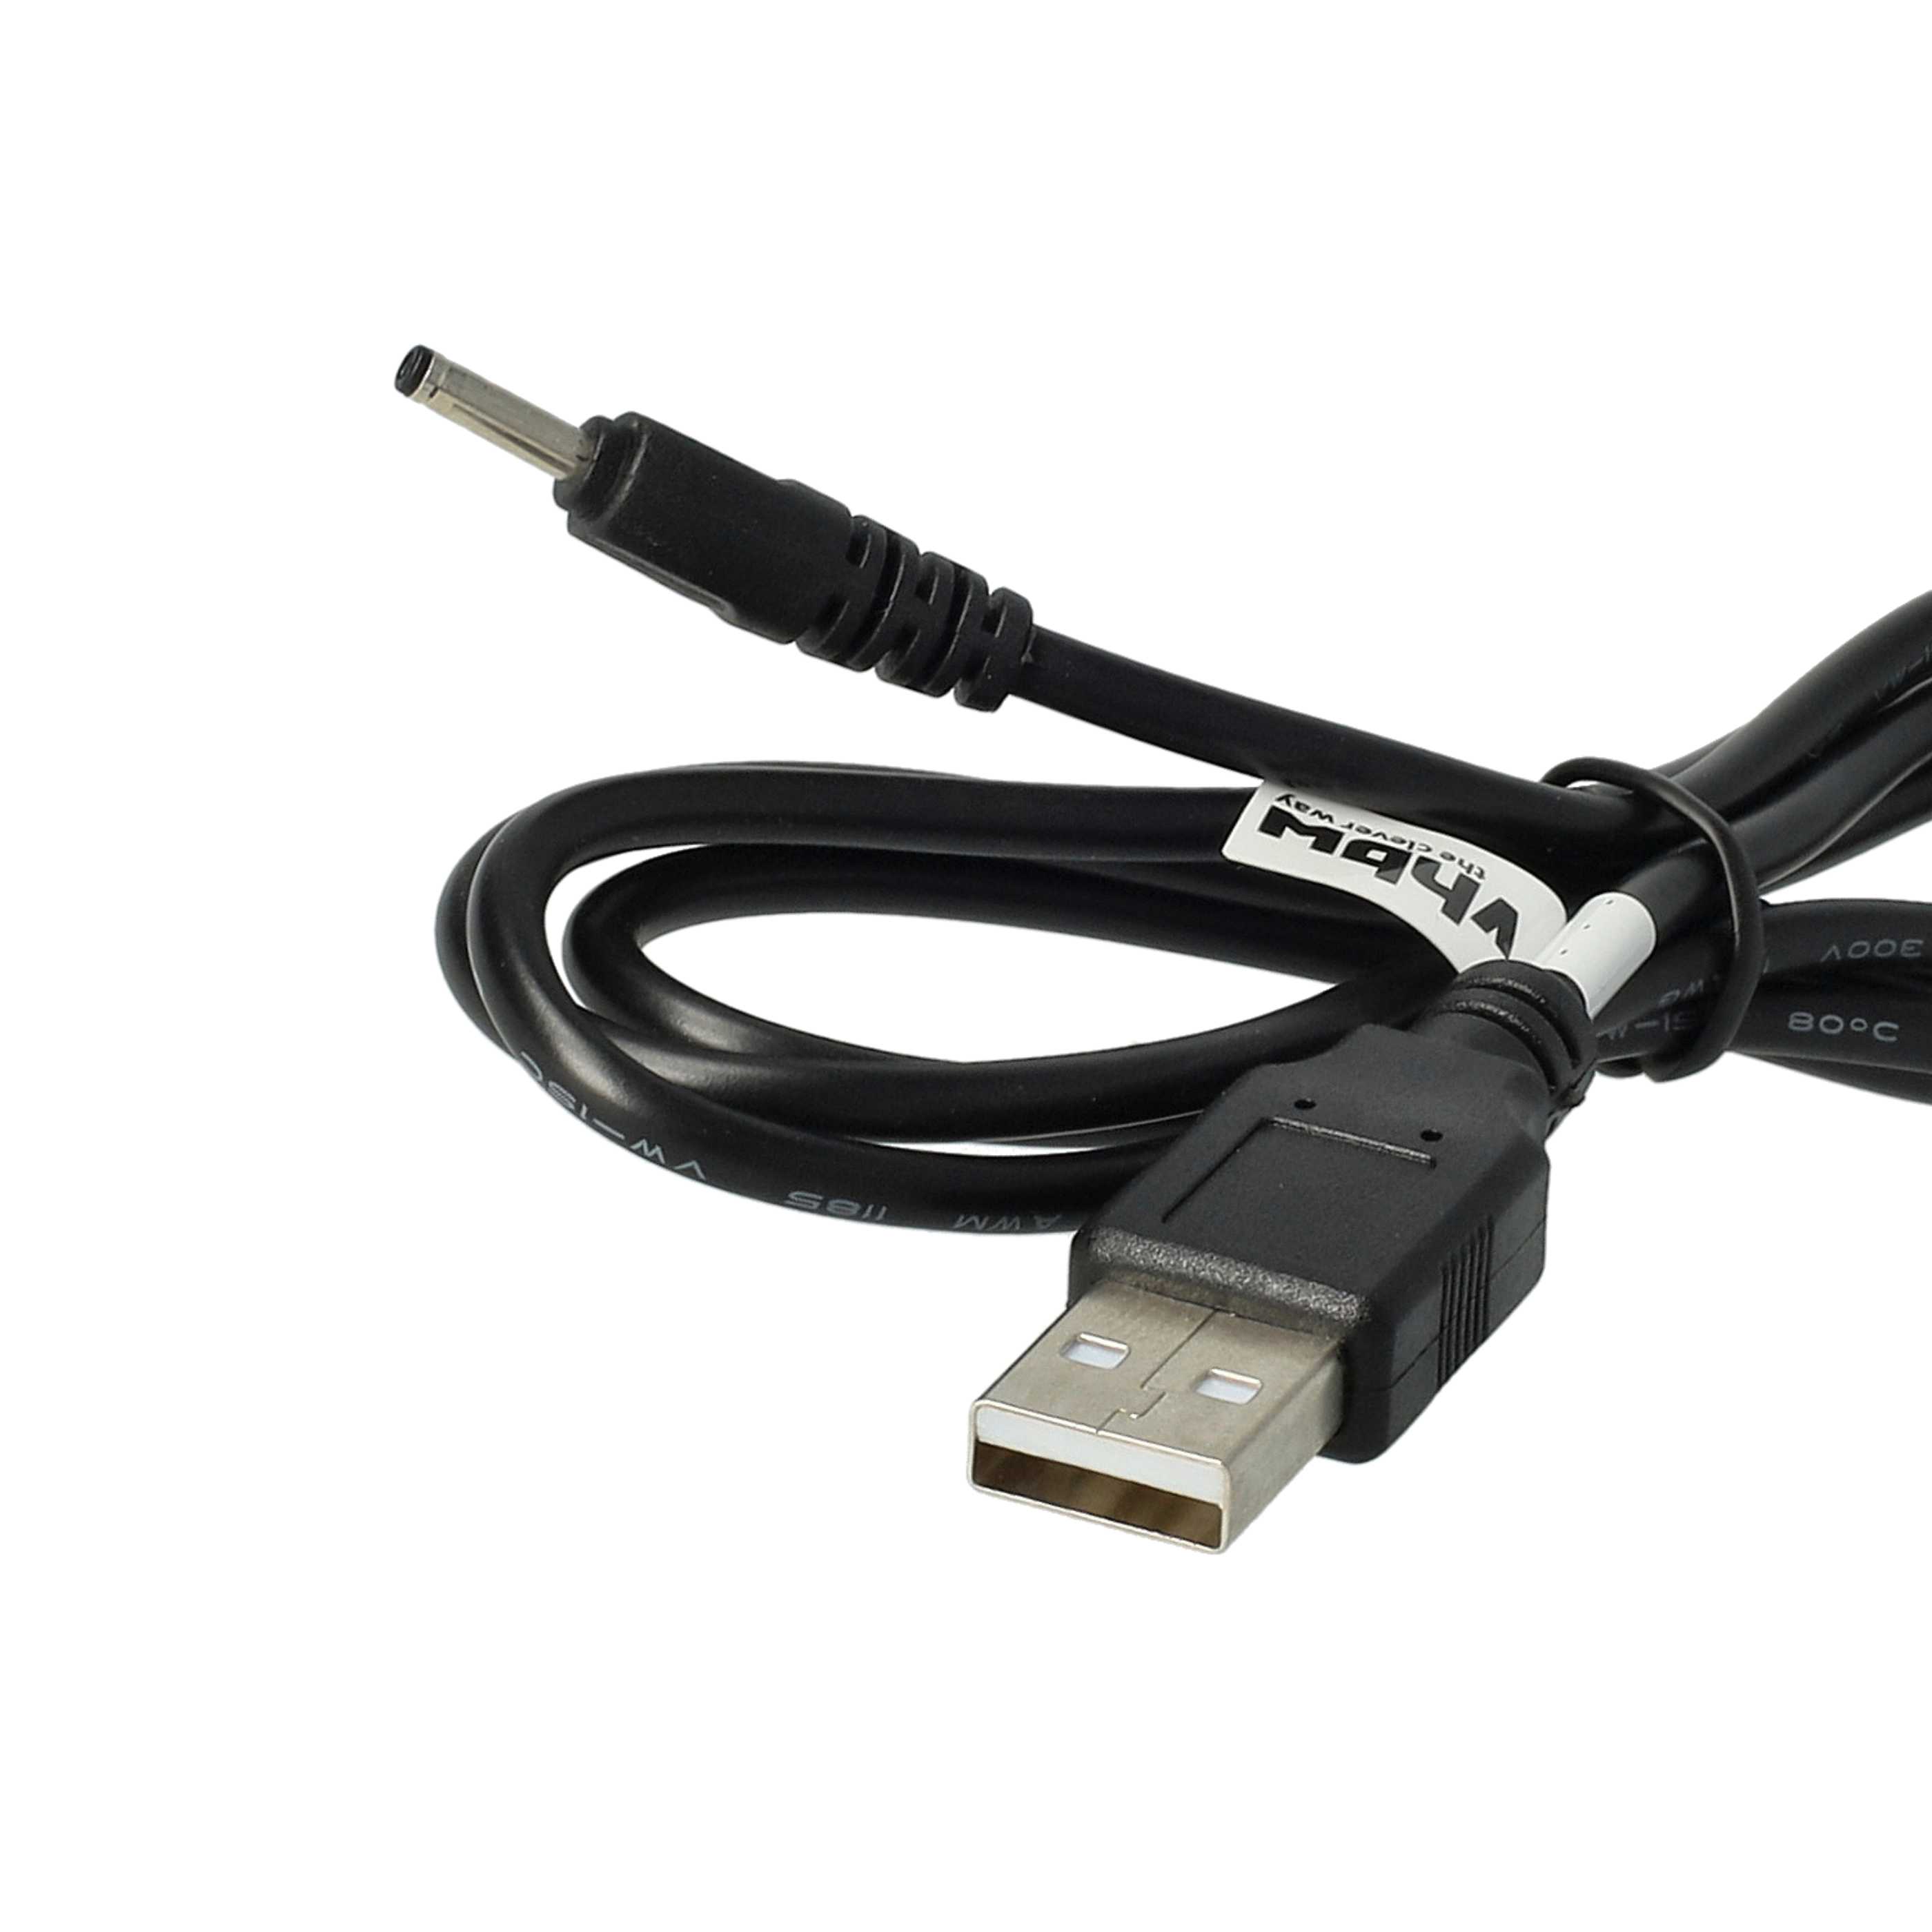 USB Charging Cable suitable for A90 Ampe Tablet etc. - 100 cm